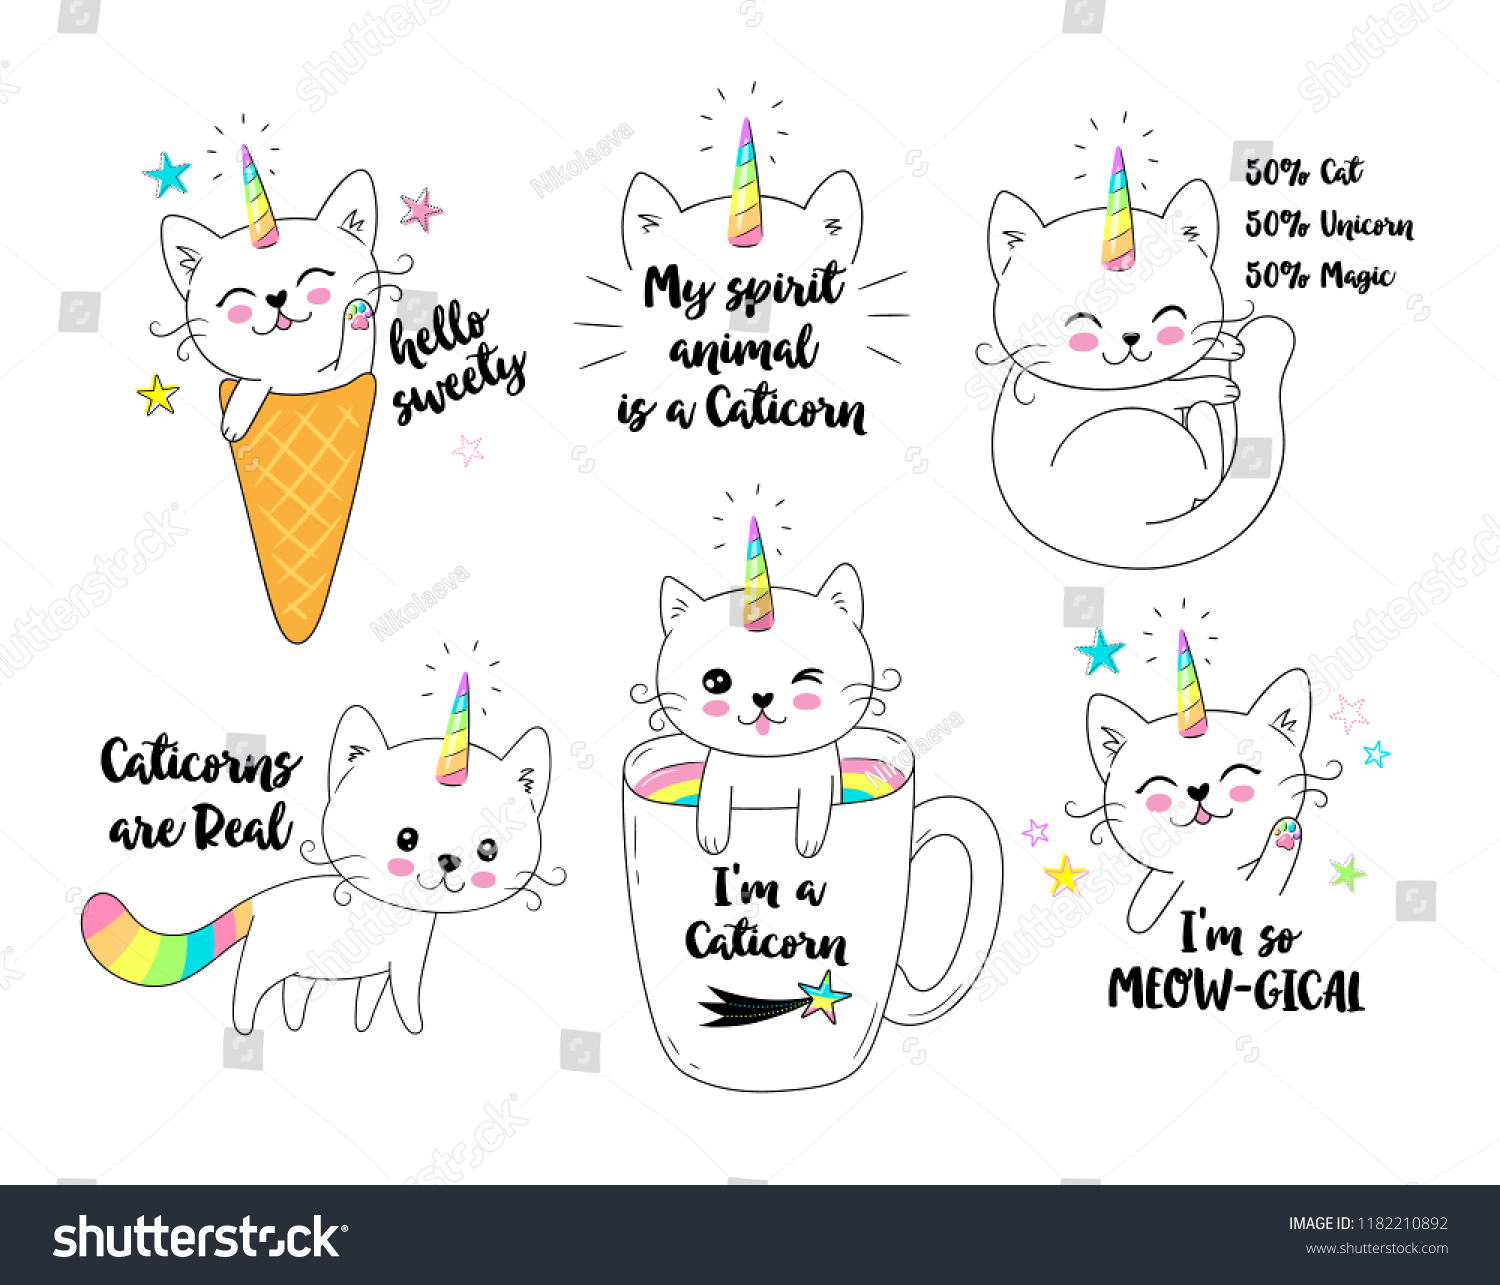 SVG of Vector illustration of a little cute white cat unicorn or caticorn . Can be used as greeting card, sticker, kids t-shirt design, print or poster svg